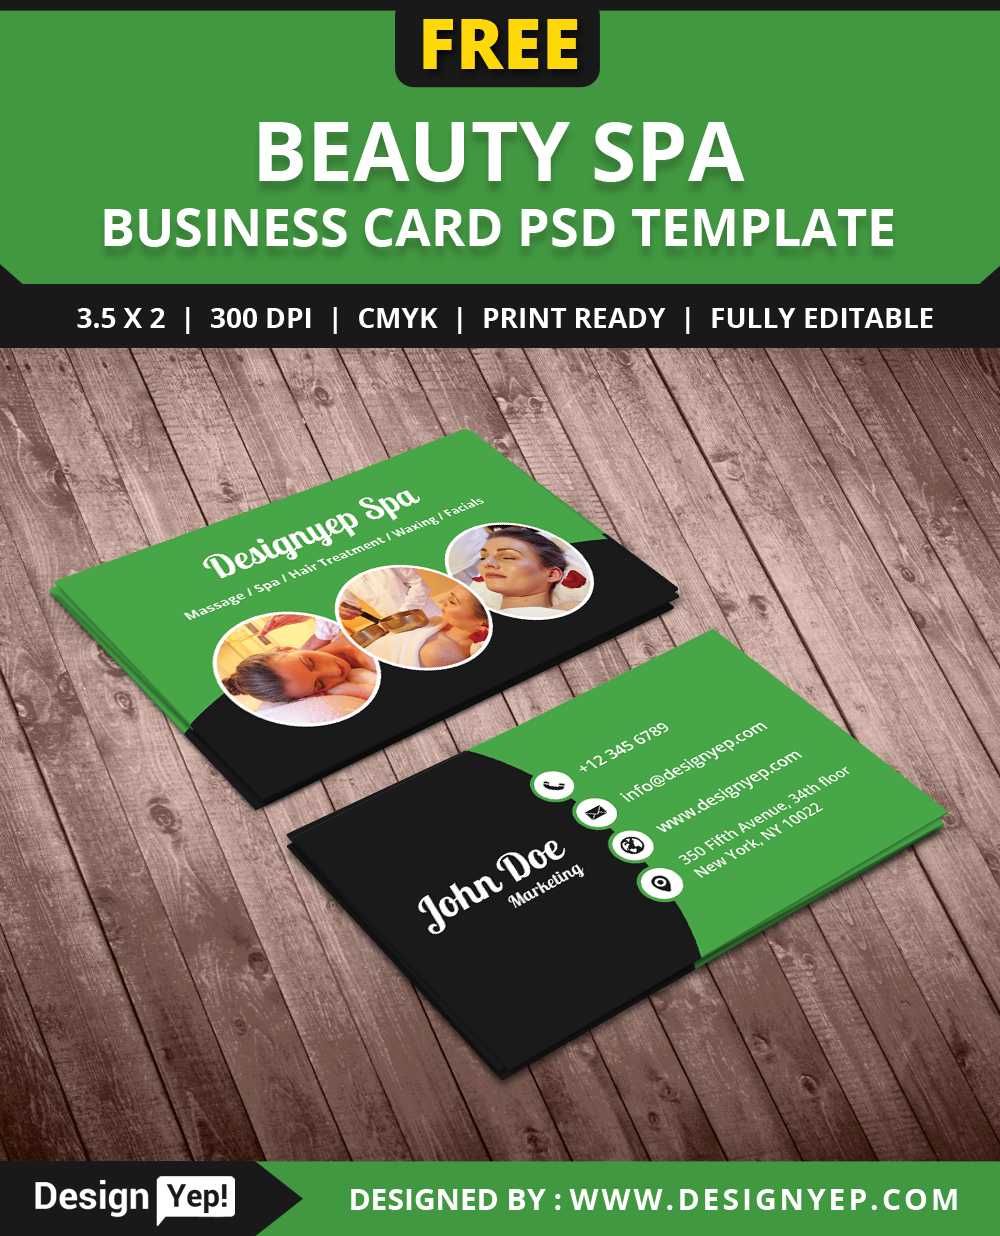 Free Beauty Spa Business Card Psd Template – Designyep With Massage Therapy Business Card Templates